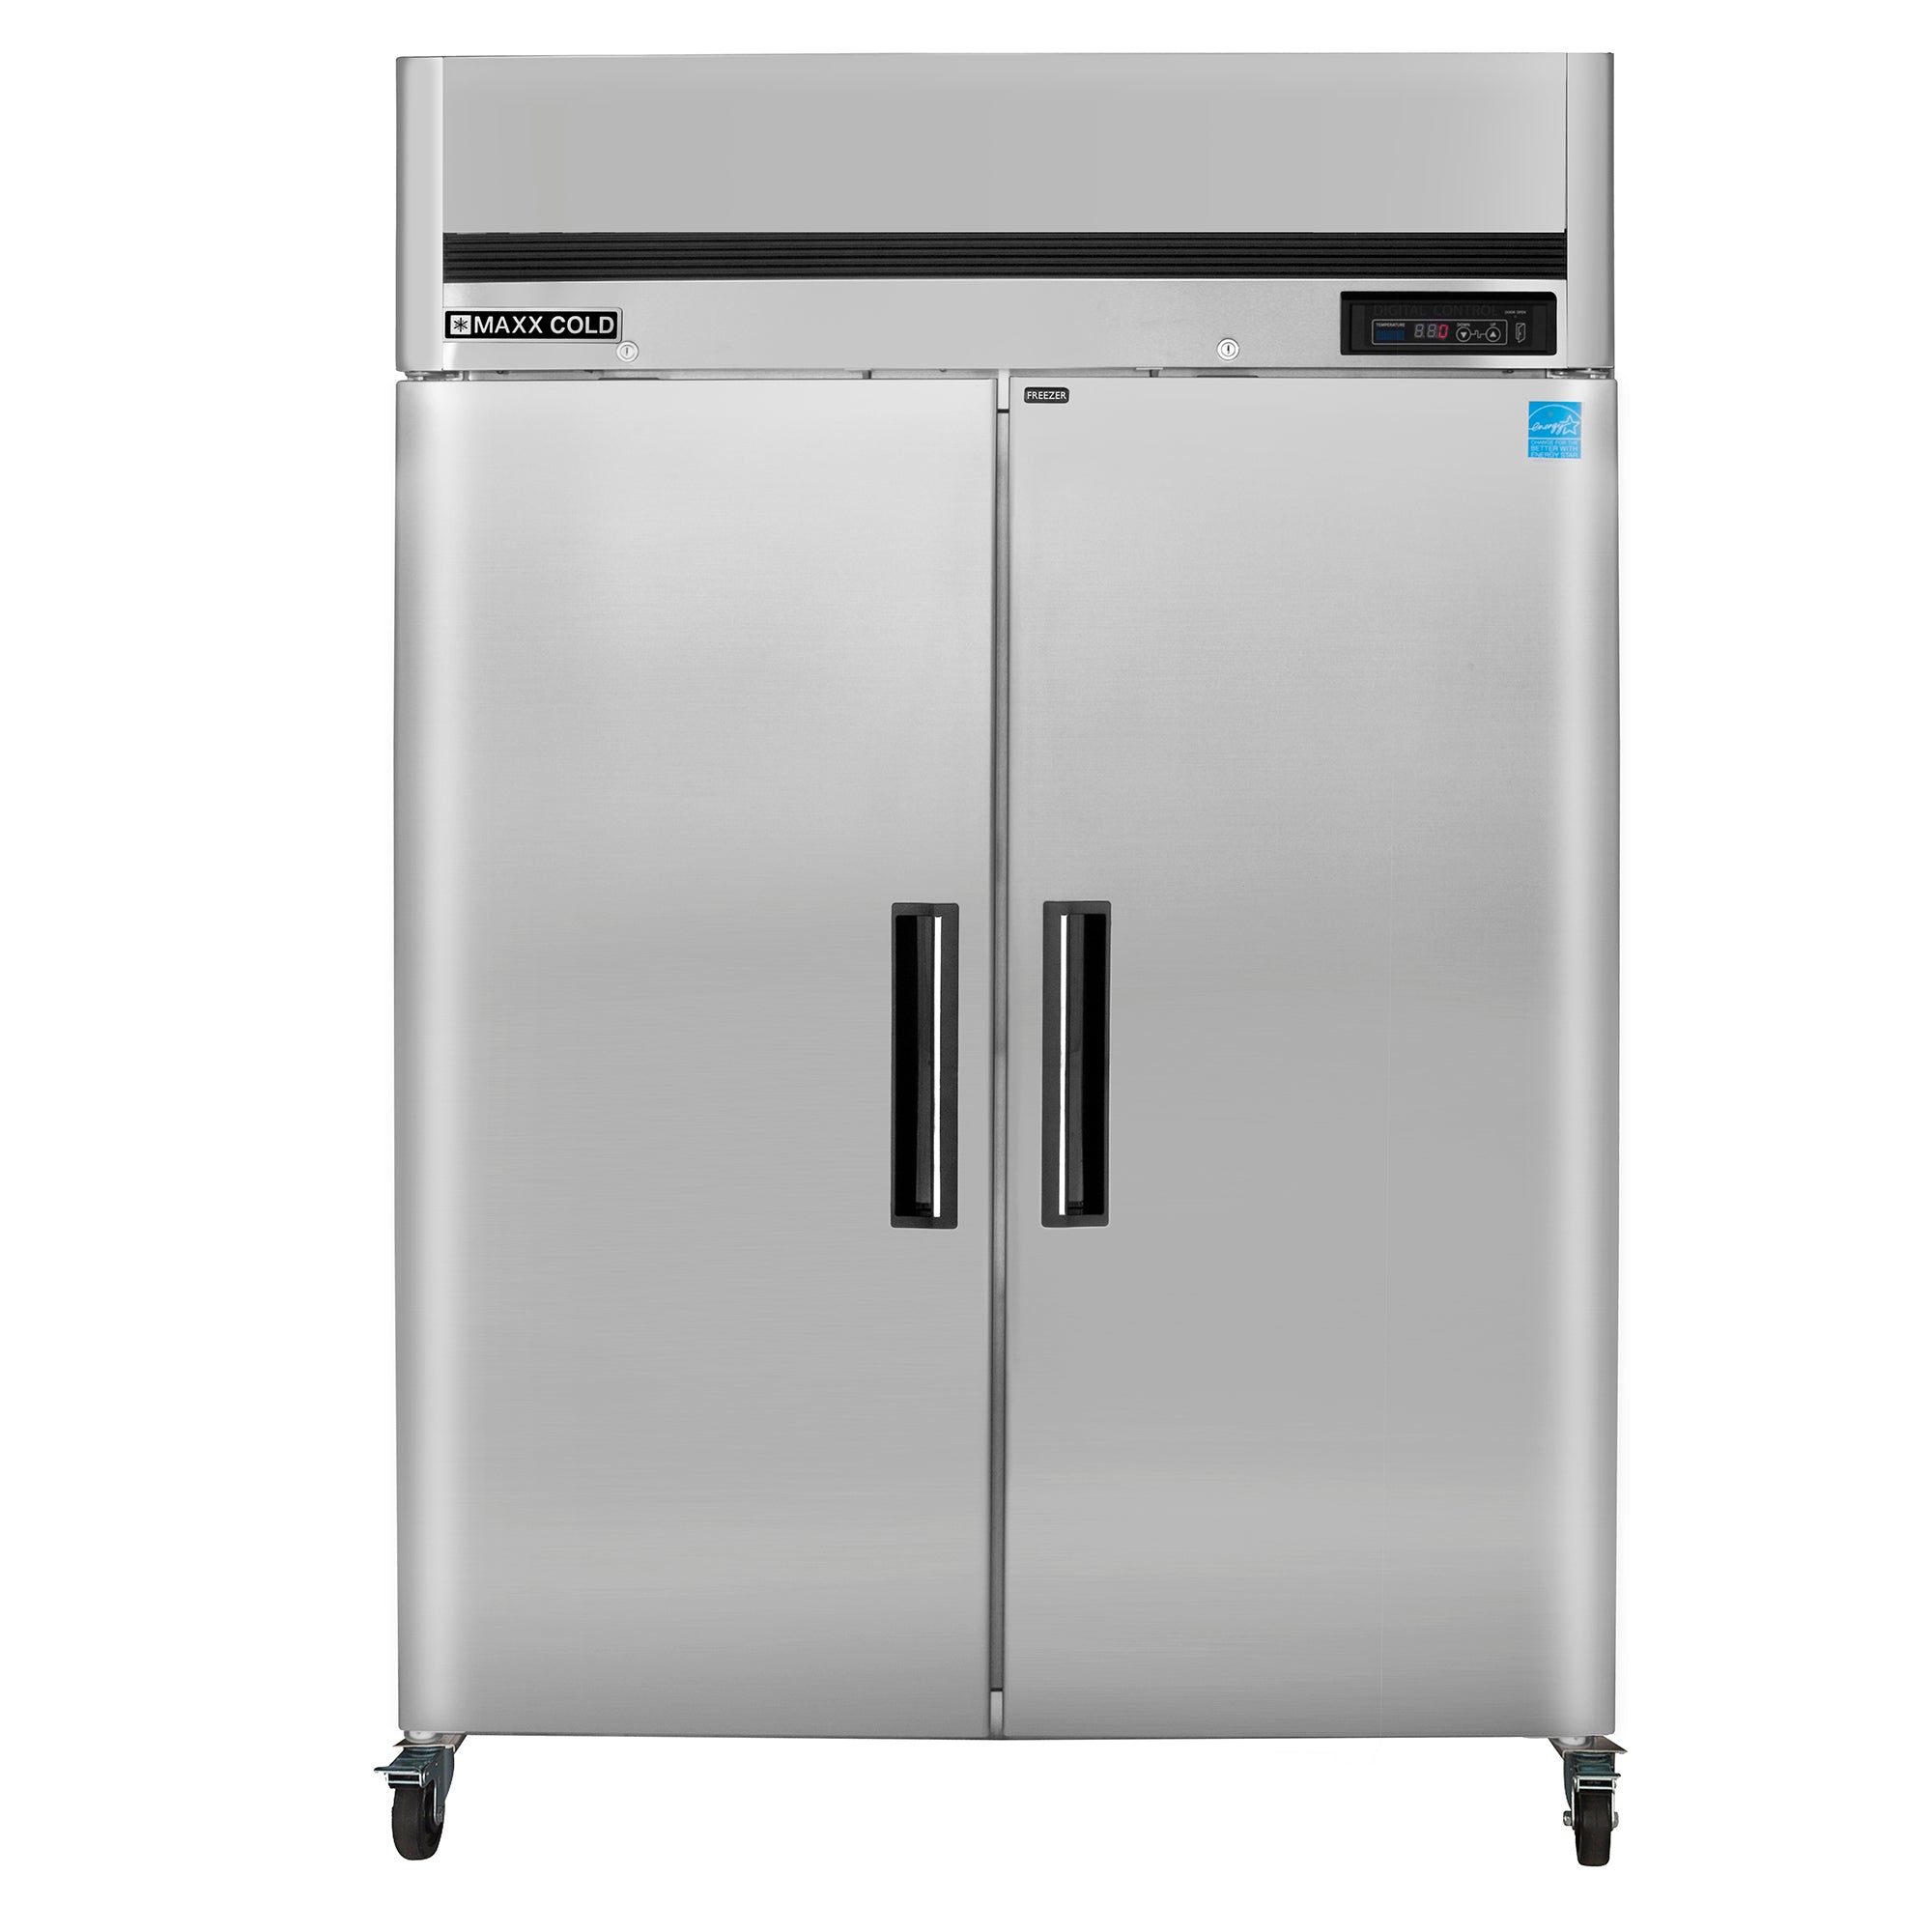 Maxx Cold - MCFT-49FDHC, Maxx Cold Double Door Reach-In Freezer, Top Mount, 54"W, 49 cu. ft. Storage Capacity, Energy Star Rated, in Stainless Steel